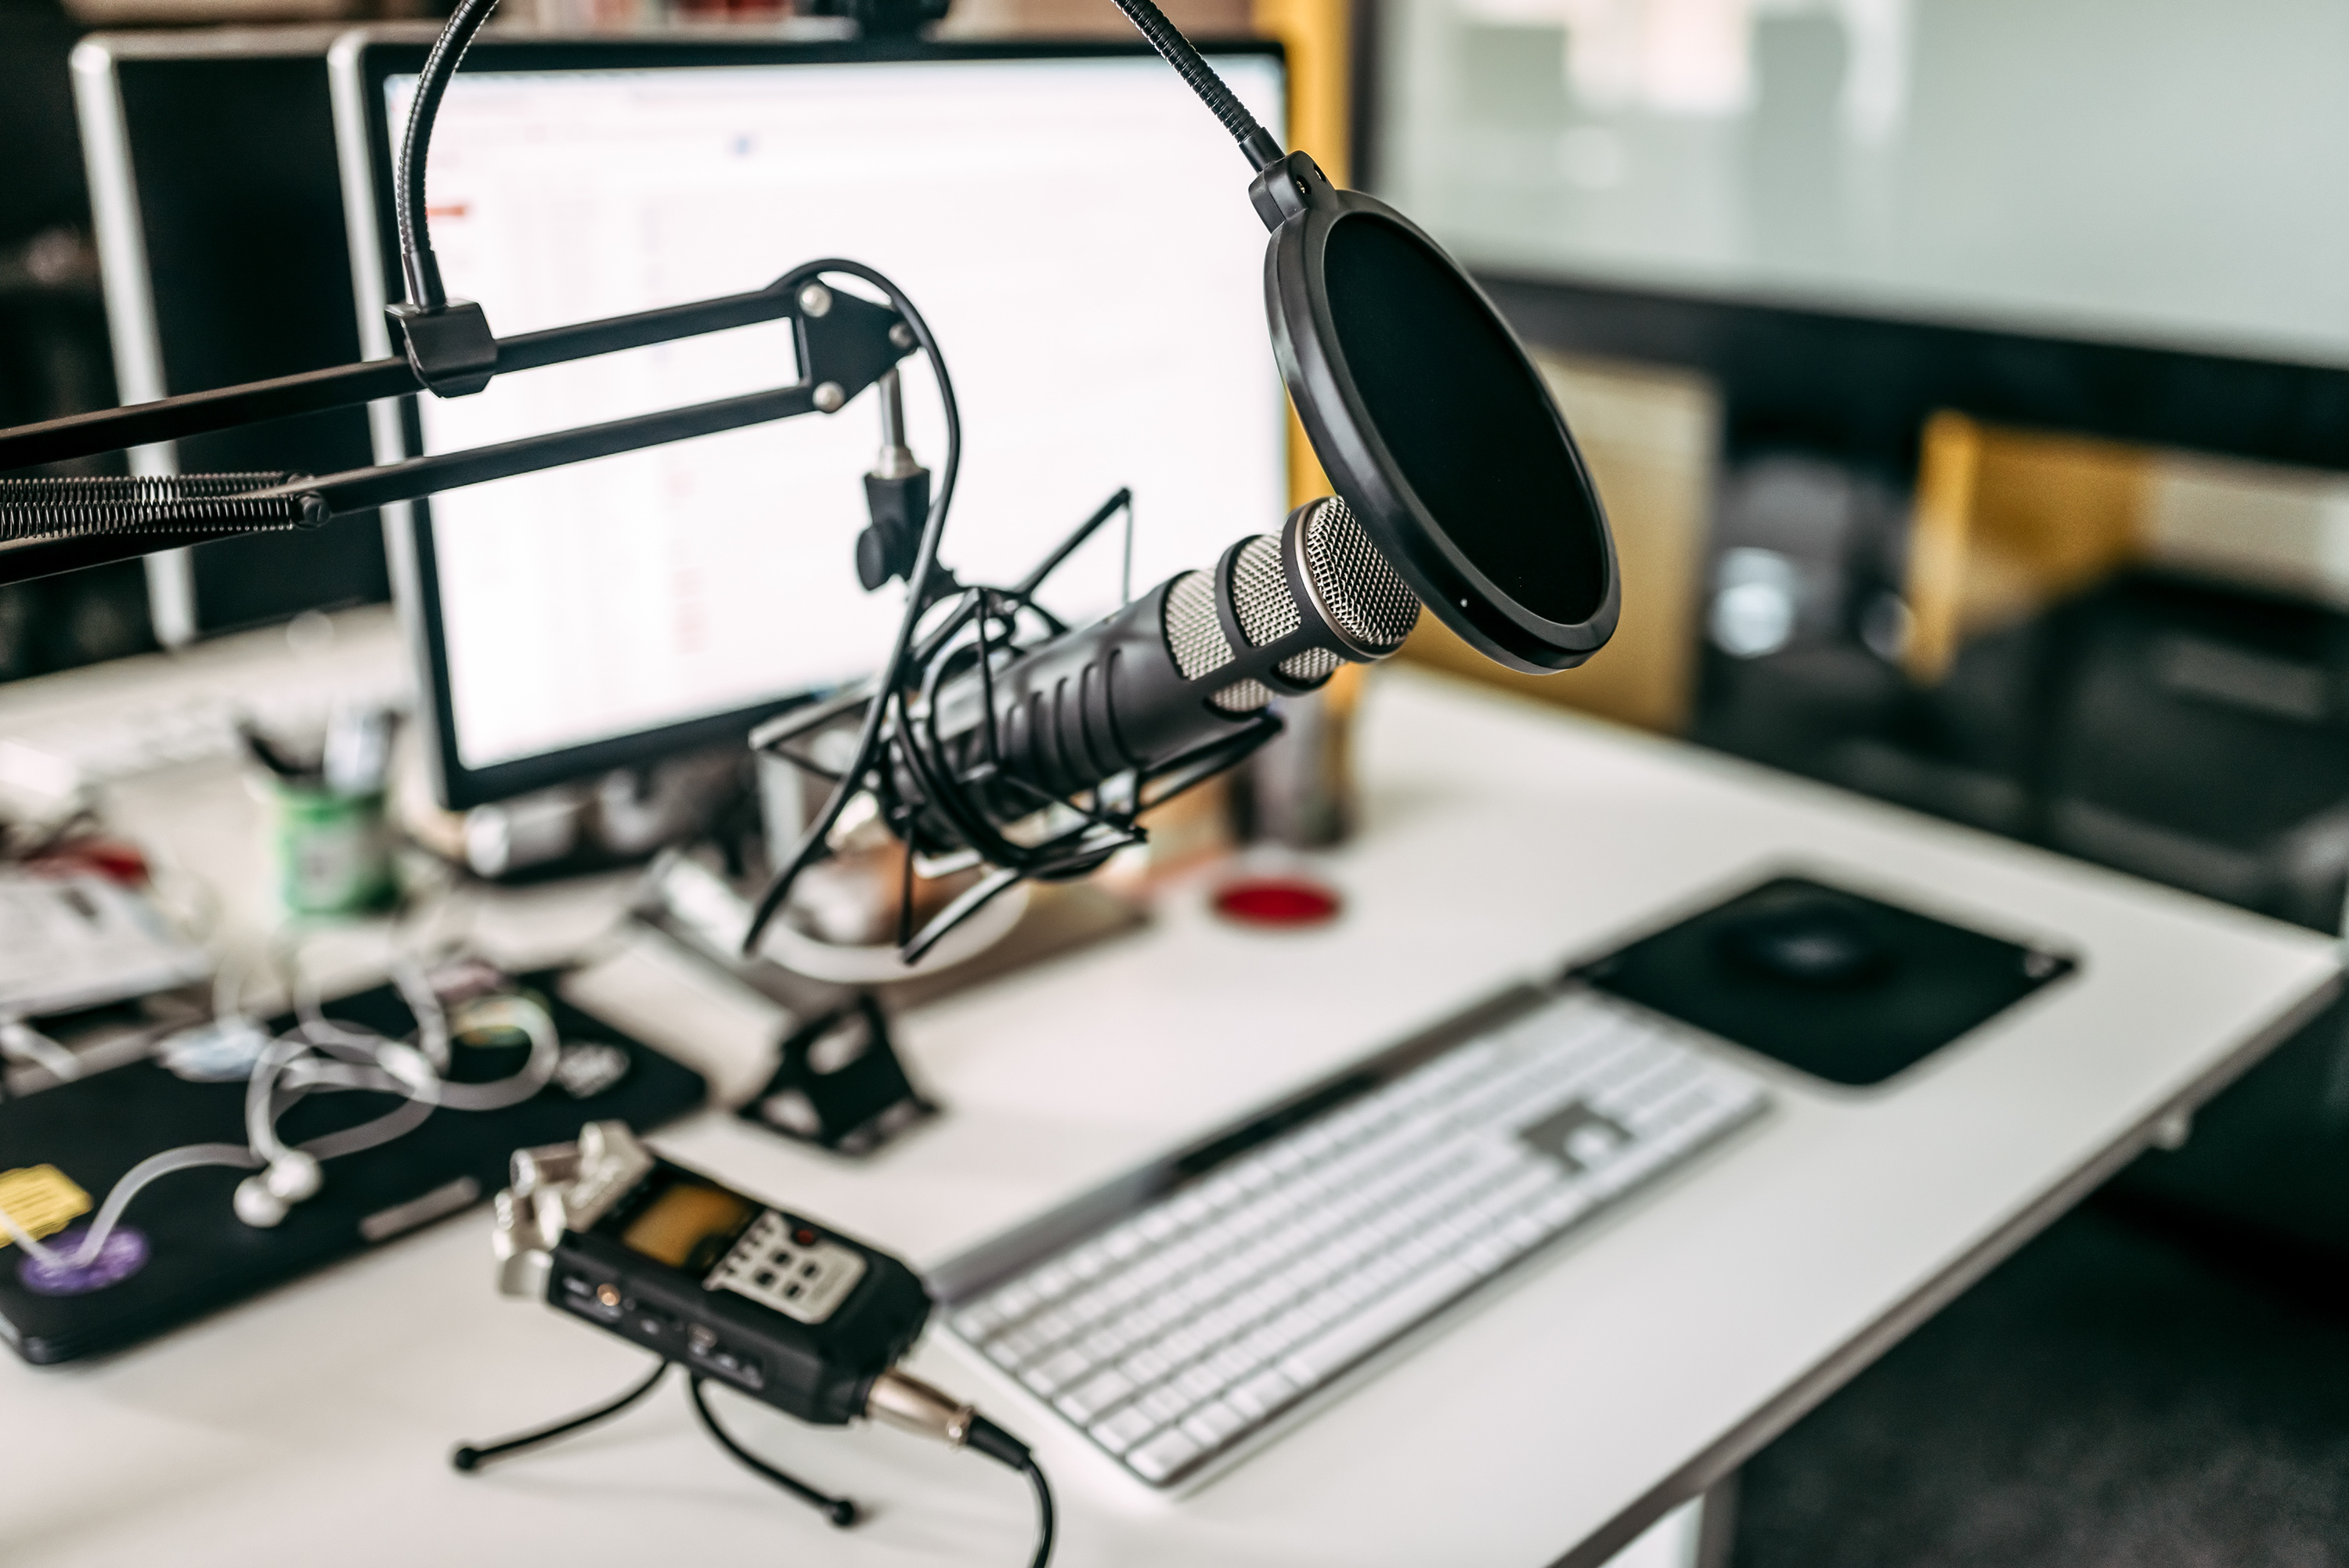 The 5 Most Insightful B2B Tech Podcasts for Marketers